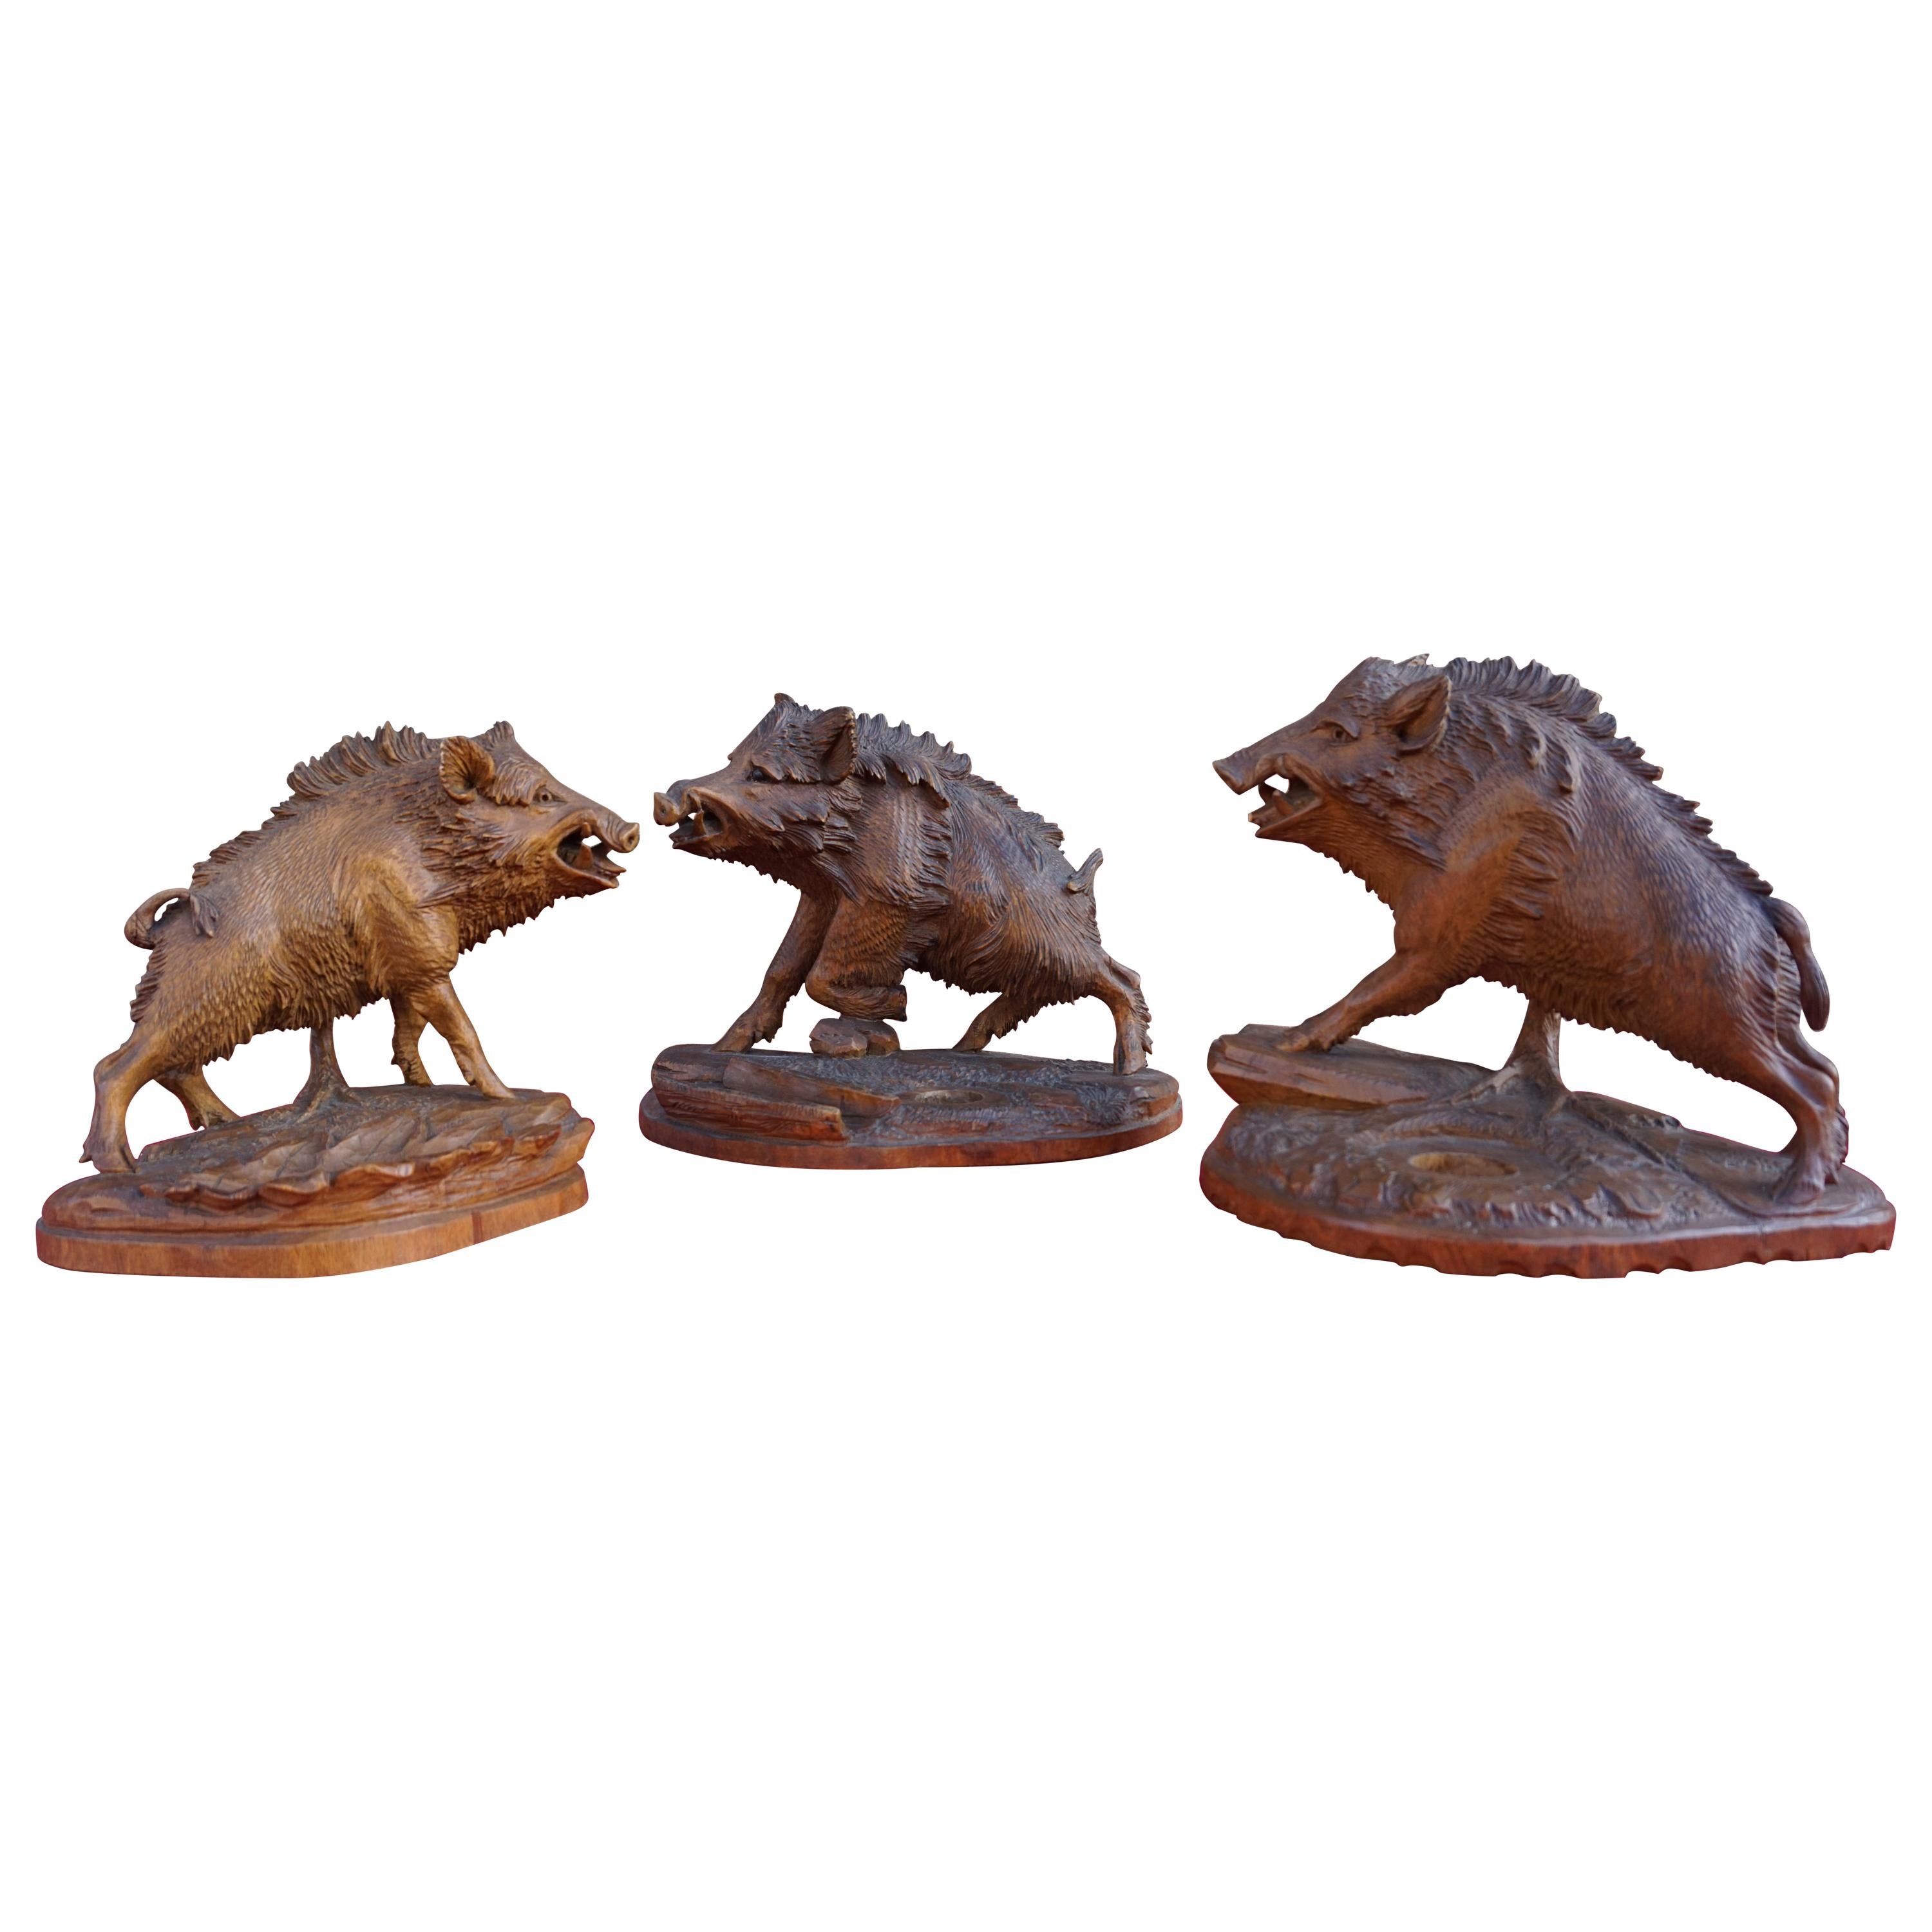 Group of Three Hand Carved Swiss Black Forest Wild Boar Sculptures by N. Deneffe